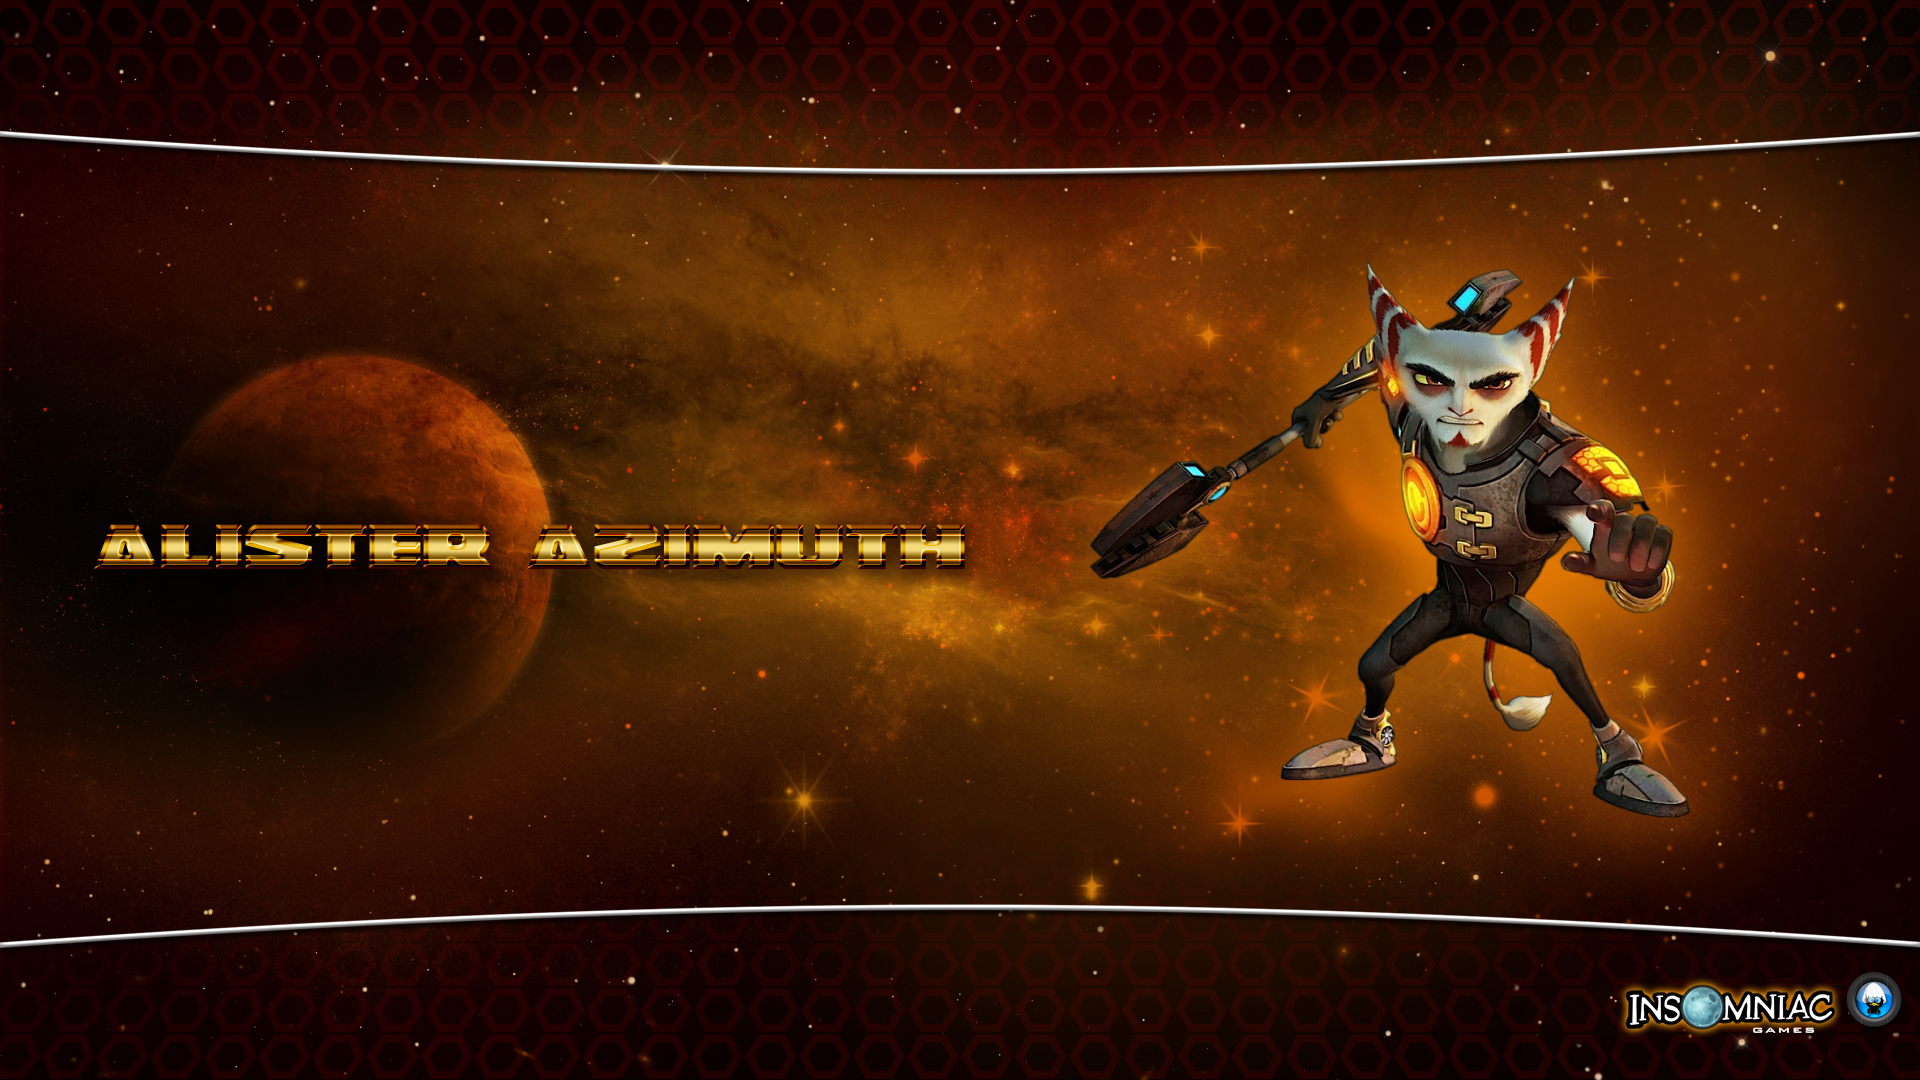 Ratchet and Clank wallpaper 1920x1080 7   hebusorg   High